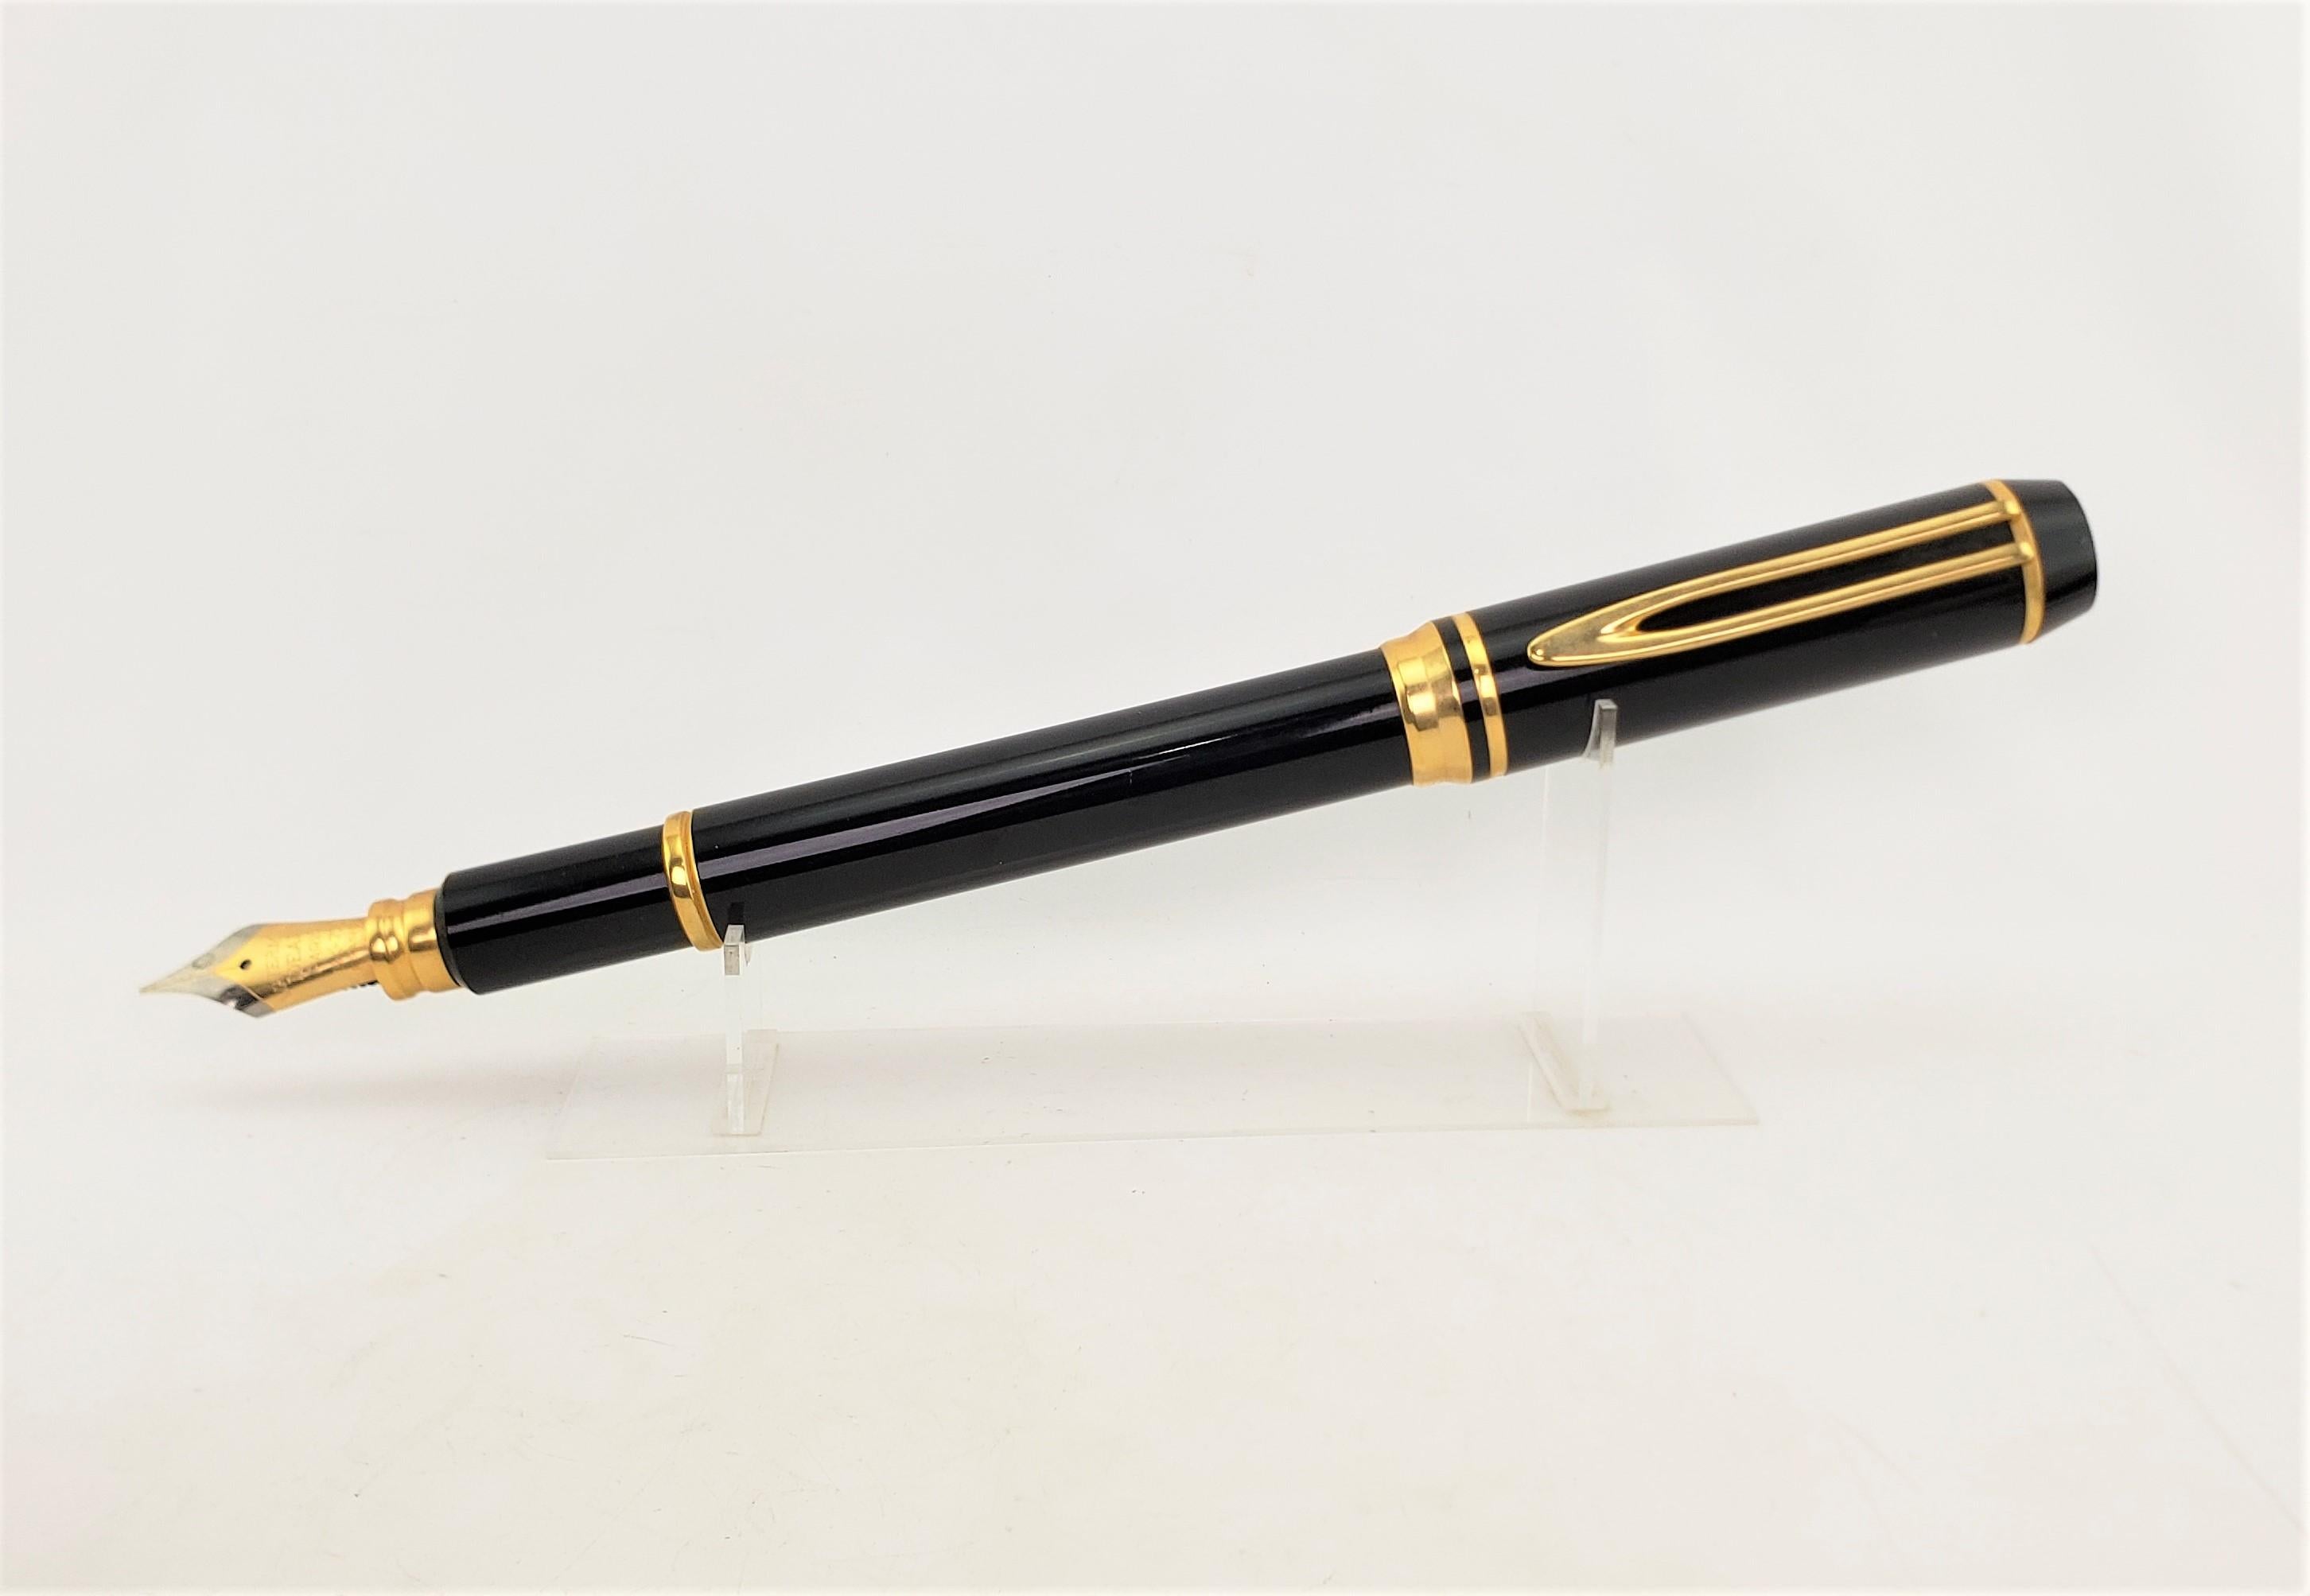 This enormous figural fountain pen store display is unsigned, but presumed to have been made by the Waterman Co. of France in approximately 1965 and done in the period Mid-Century Modern style. The display model is composed of a hard molded black